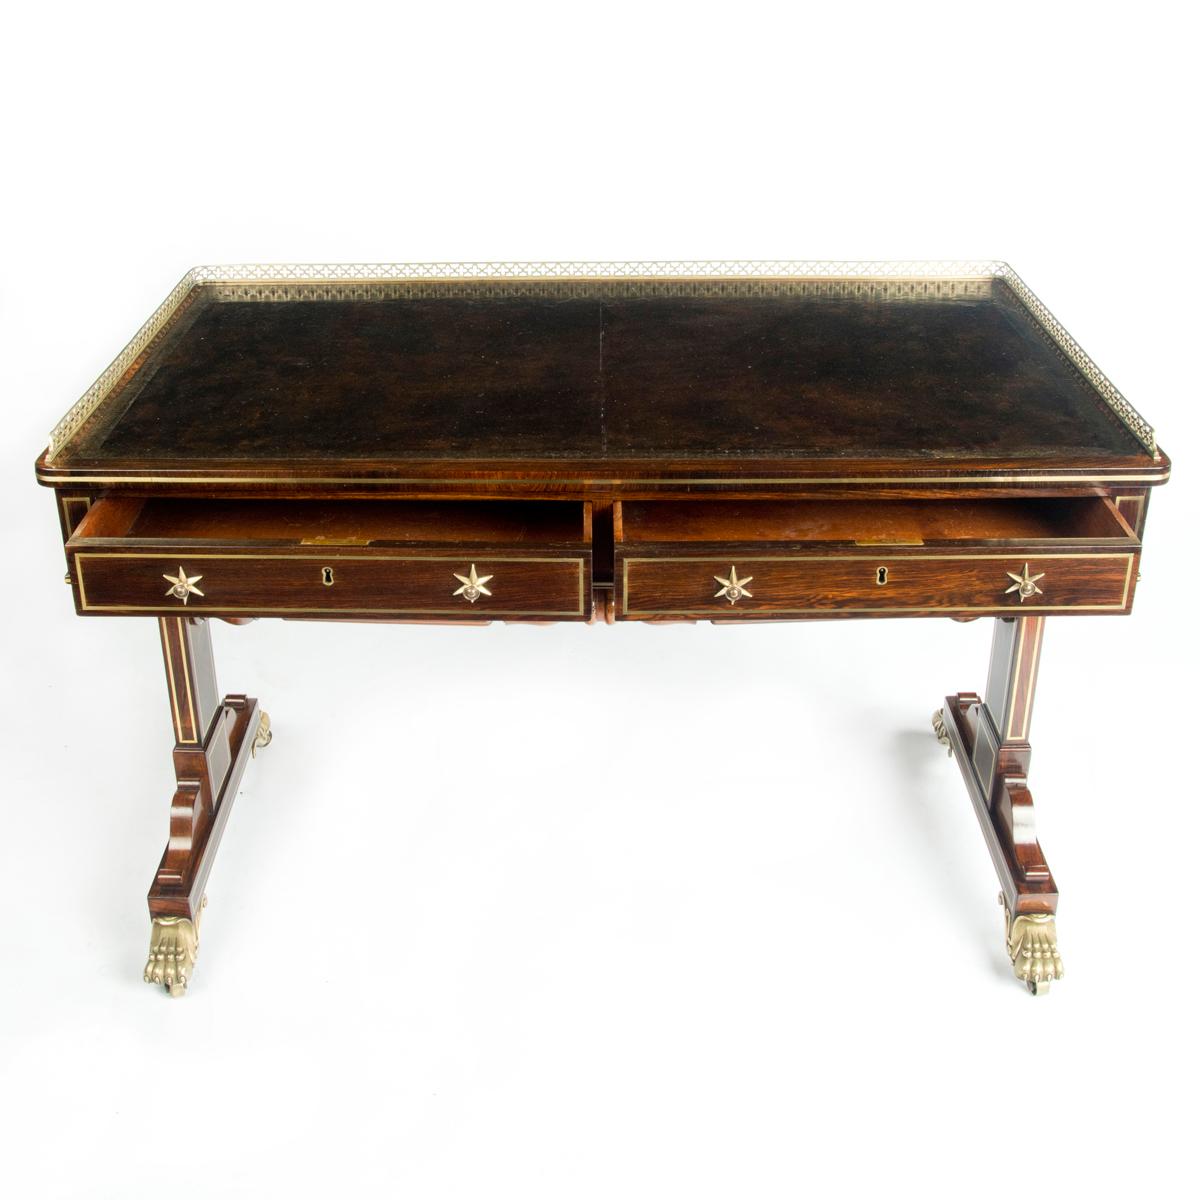 Early 19th Century Regency Rosewood Free Standing End Support Writing Table, by Gillows